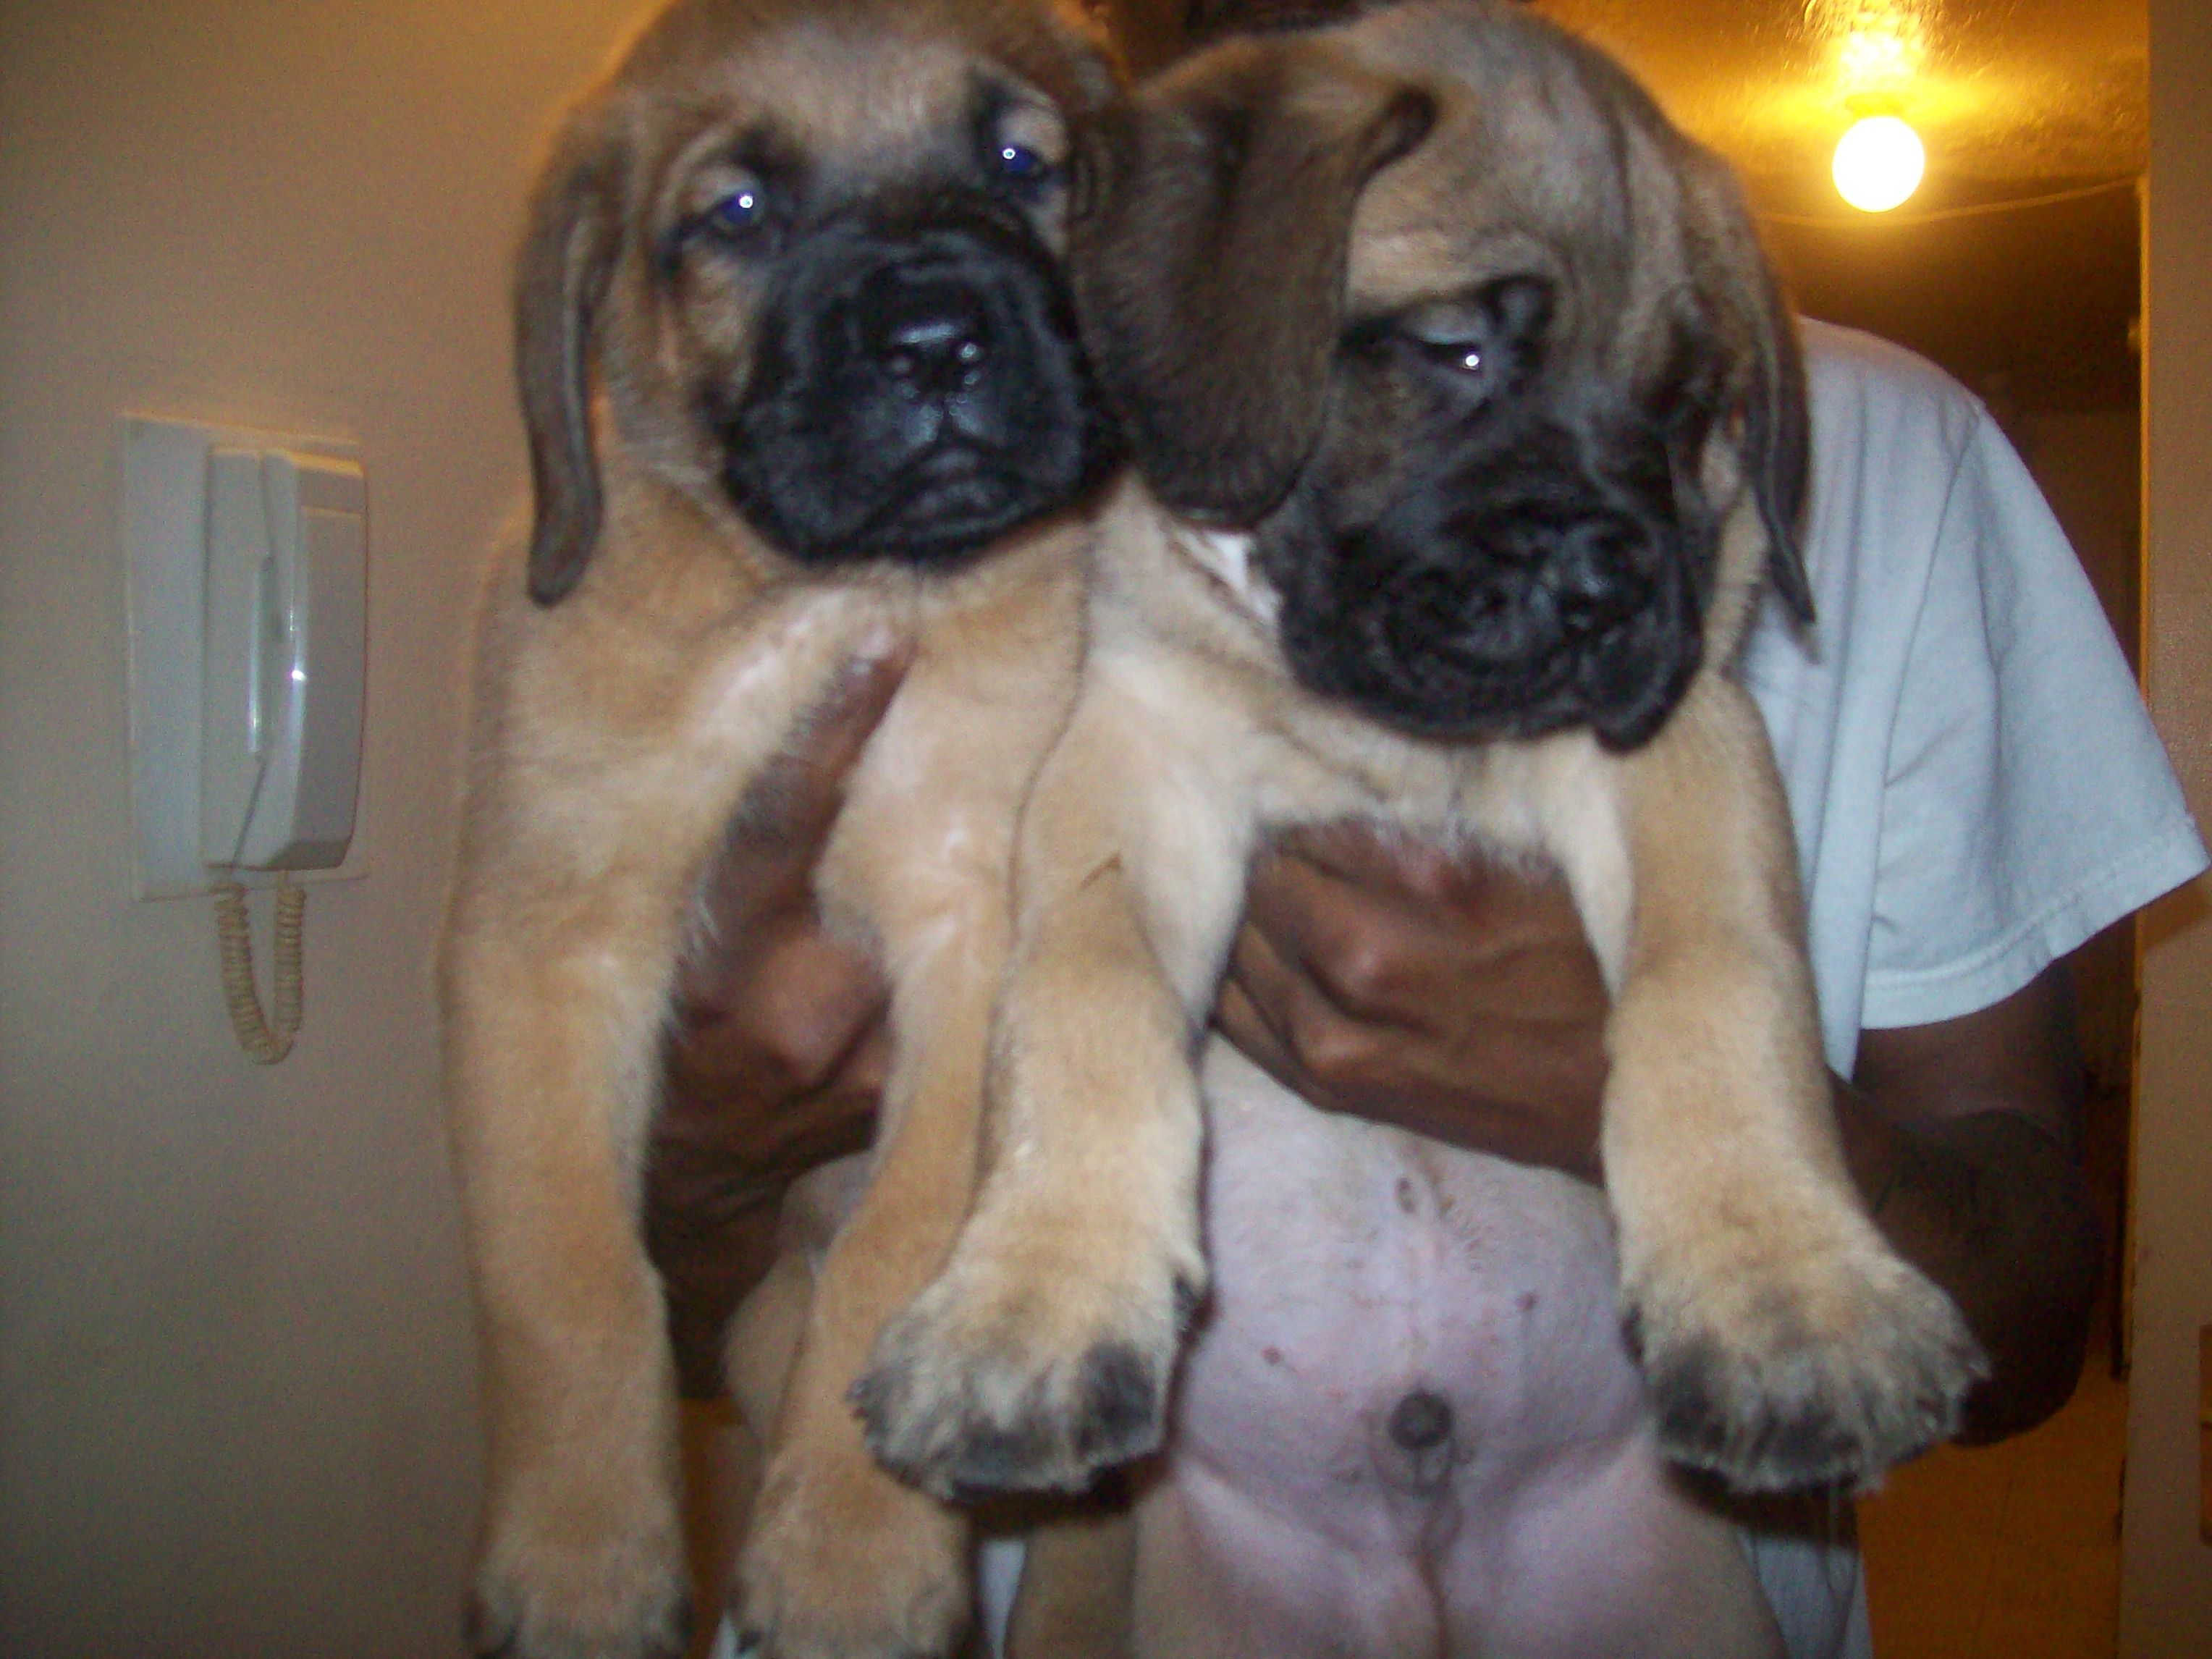 Muscle Mastiff - Dogue de Bordeau and Mastiff Mix Pictures and Information